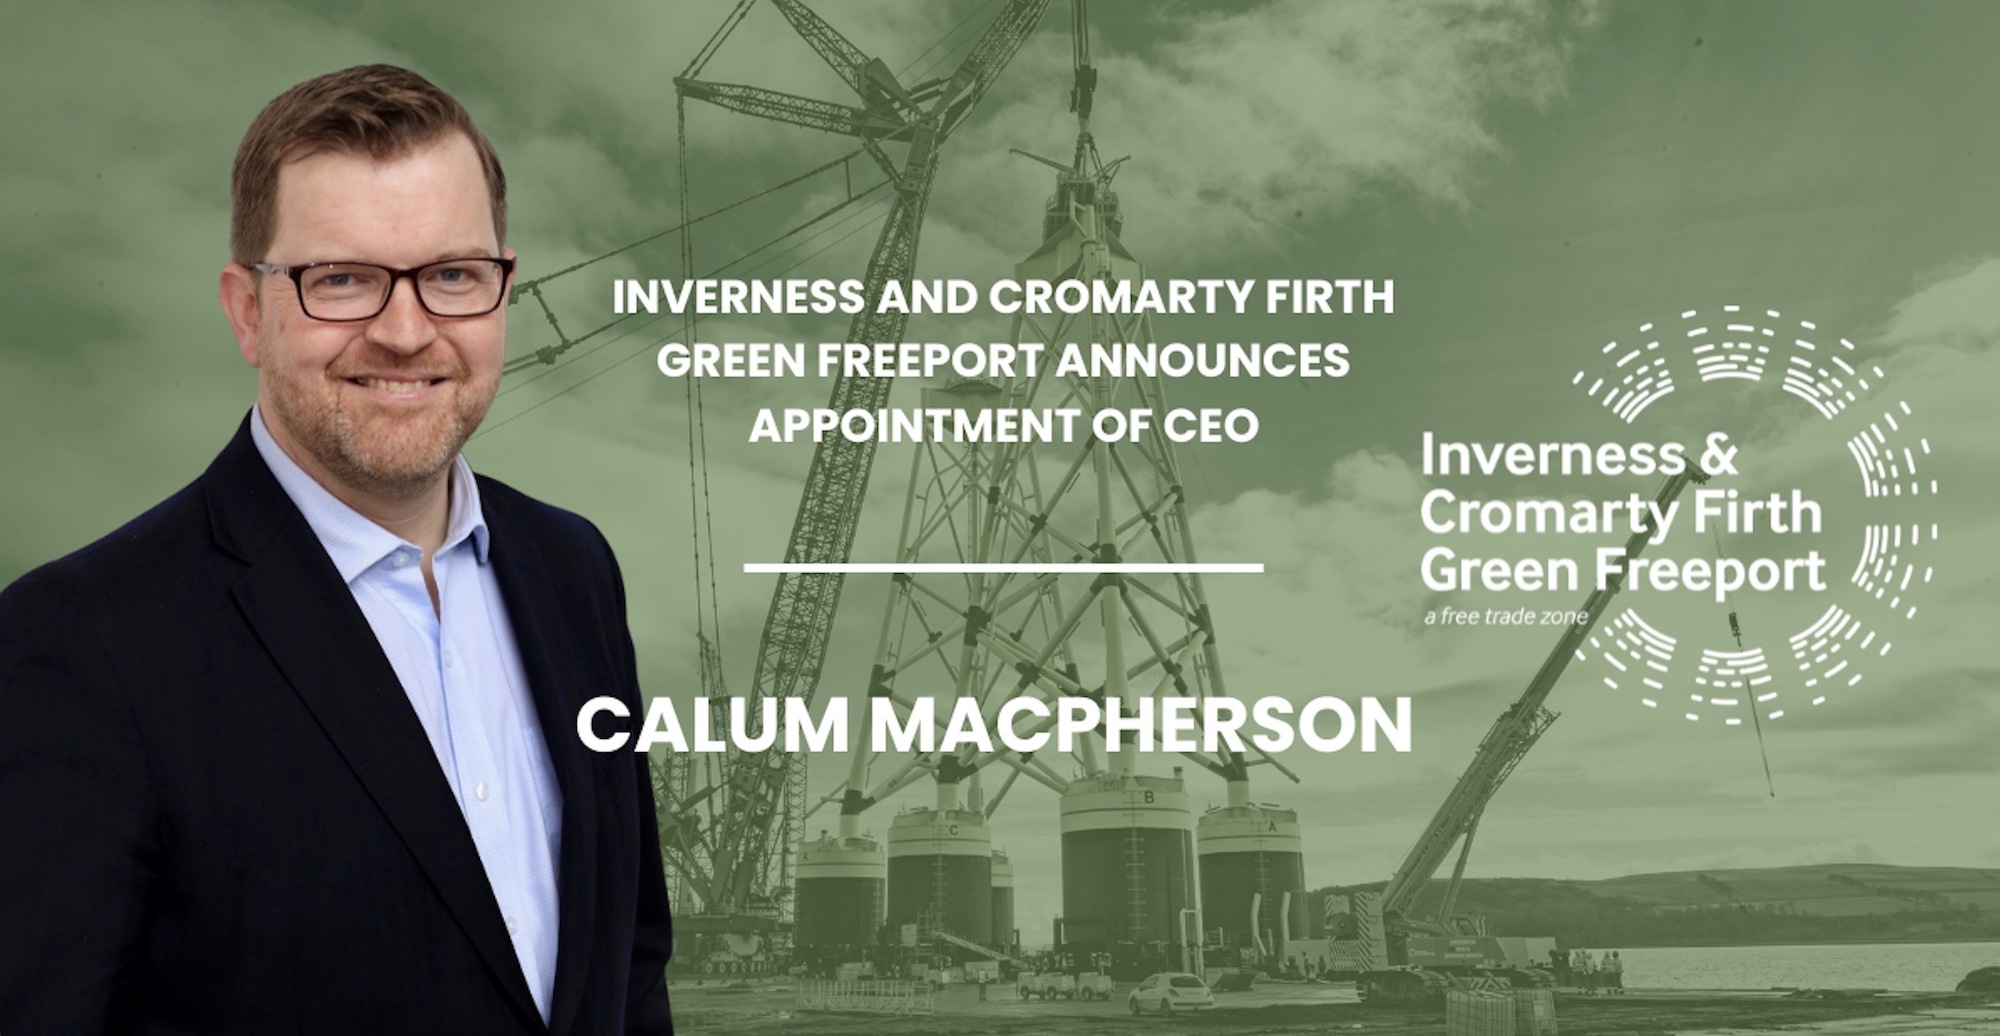 Highland native takes helm at Inverness and Cromarty Firth Green Freeport